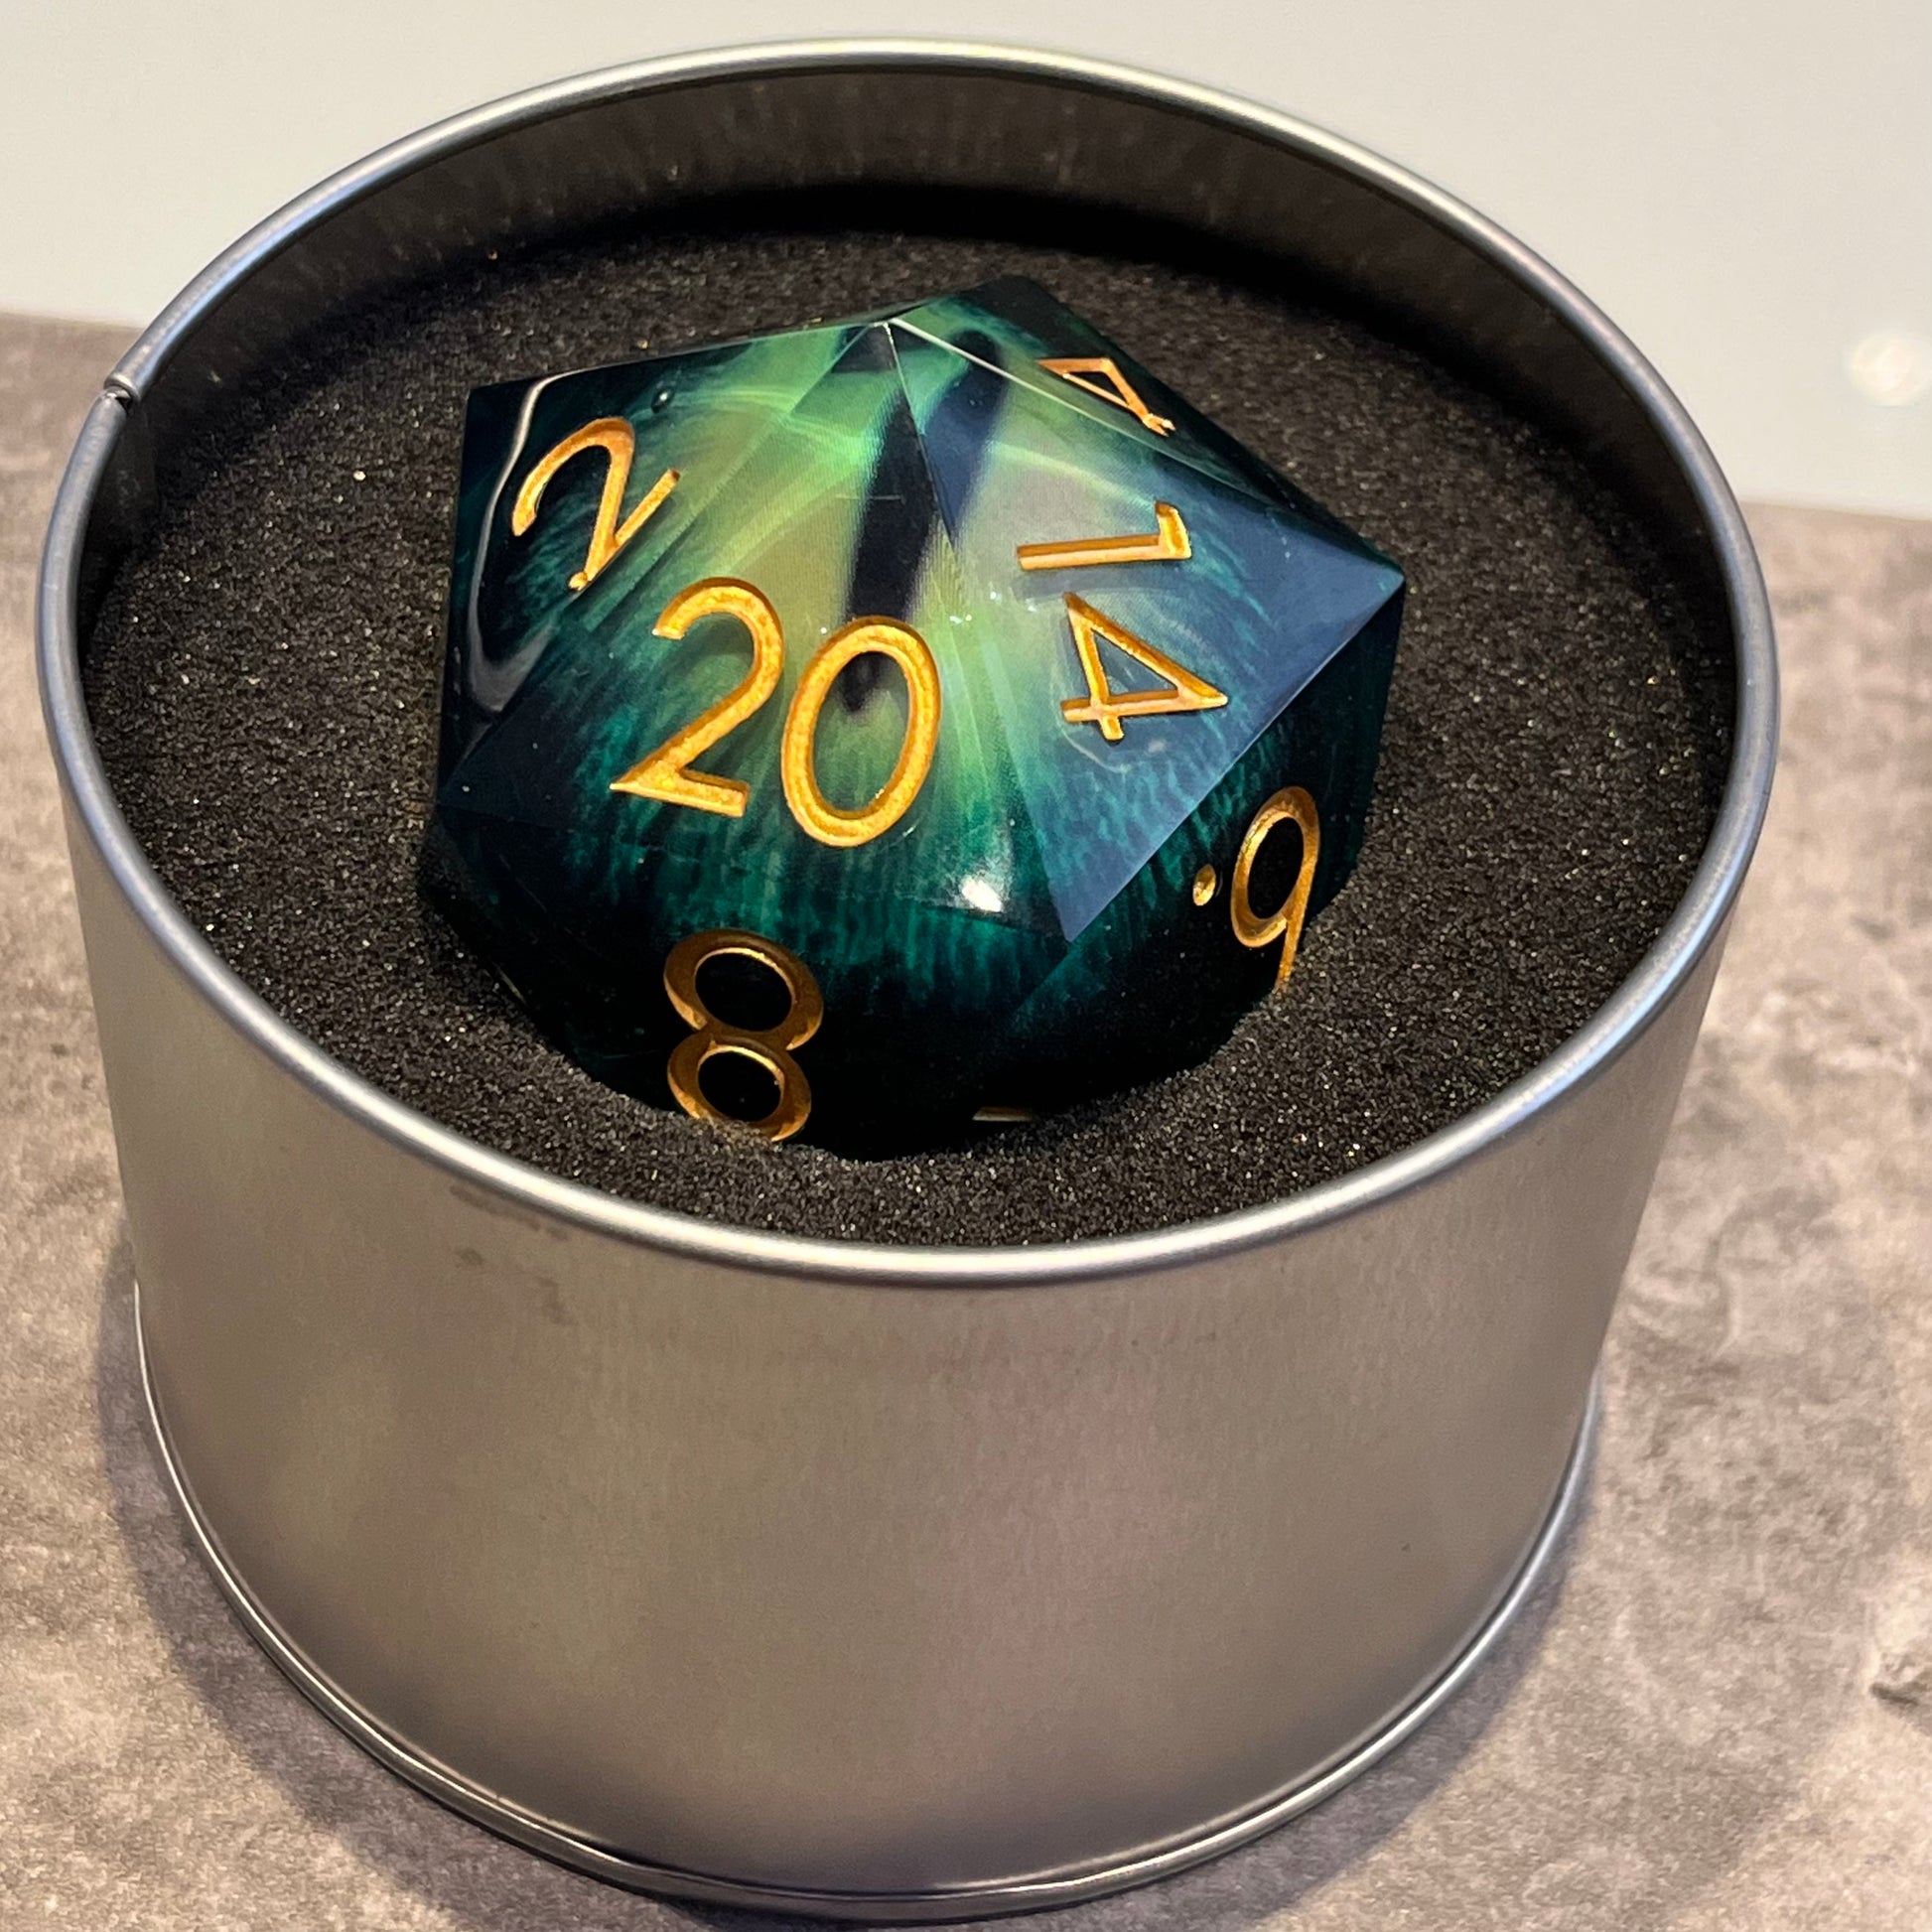 50 mm D20 dragon eye for TTRPG role playing games and dice goblin and dice dragon collectors.